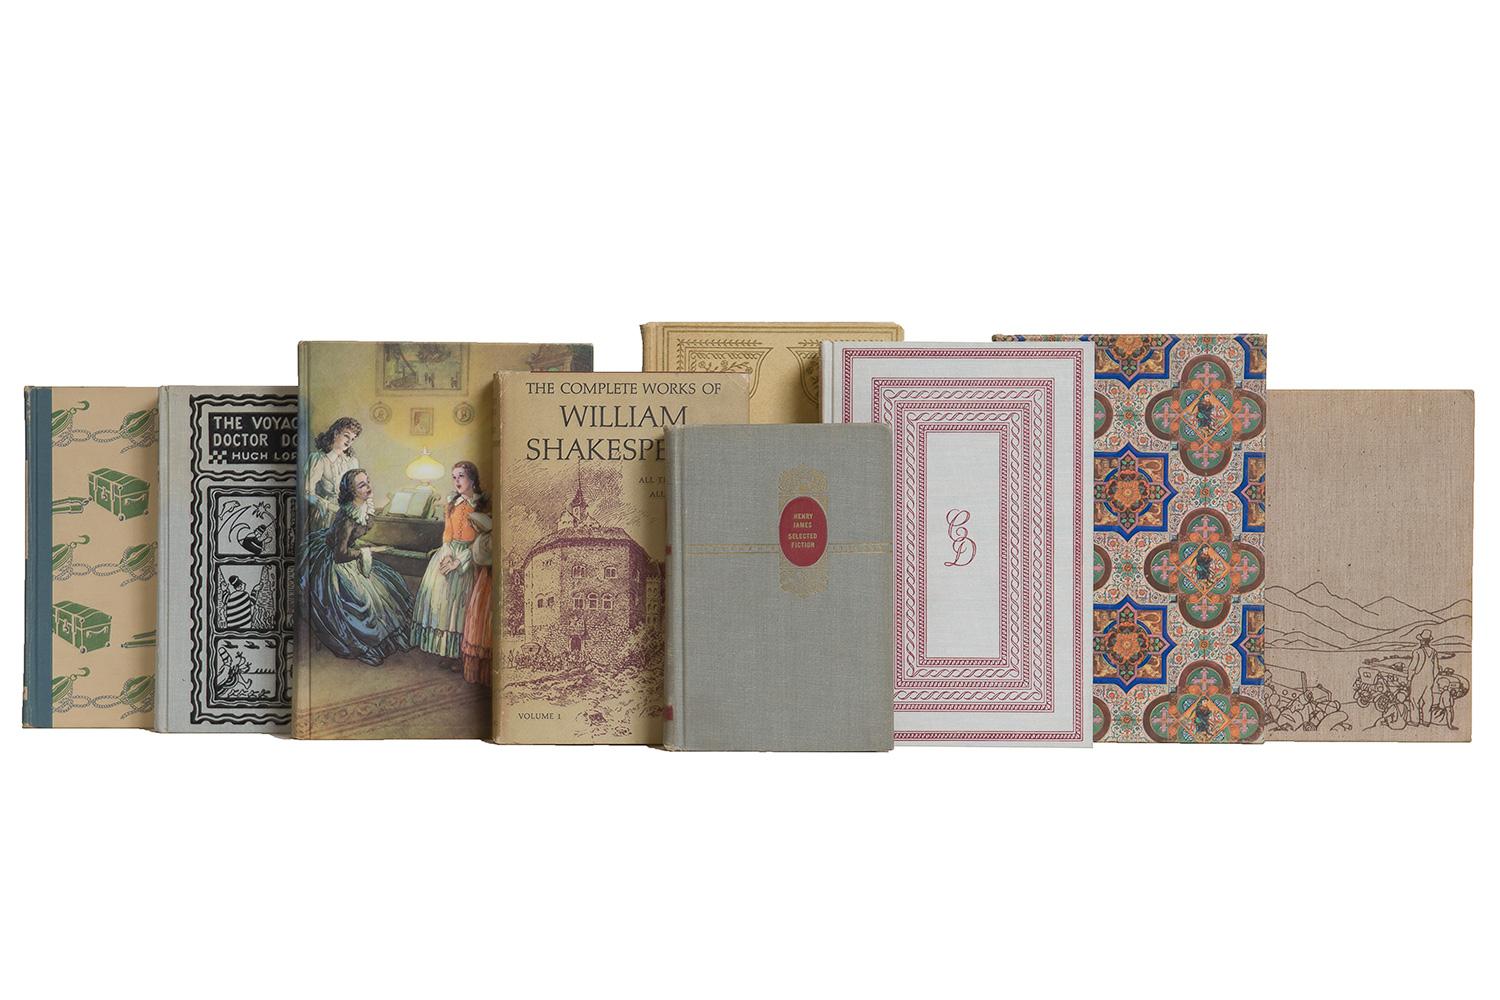 Features a blend of 21 authentic vintage books published, 1900-1939. Includes a variety of literary classics by Irving, Dumas, Dickens, and more in decorative shades of tan and blue with pops of red. Selective titles are housed in original dust